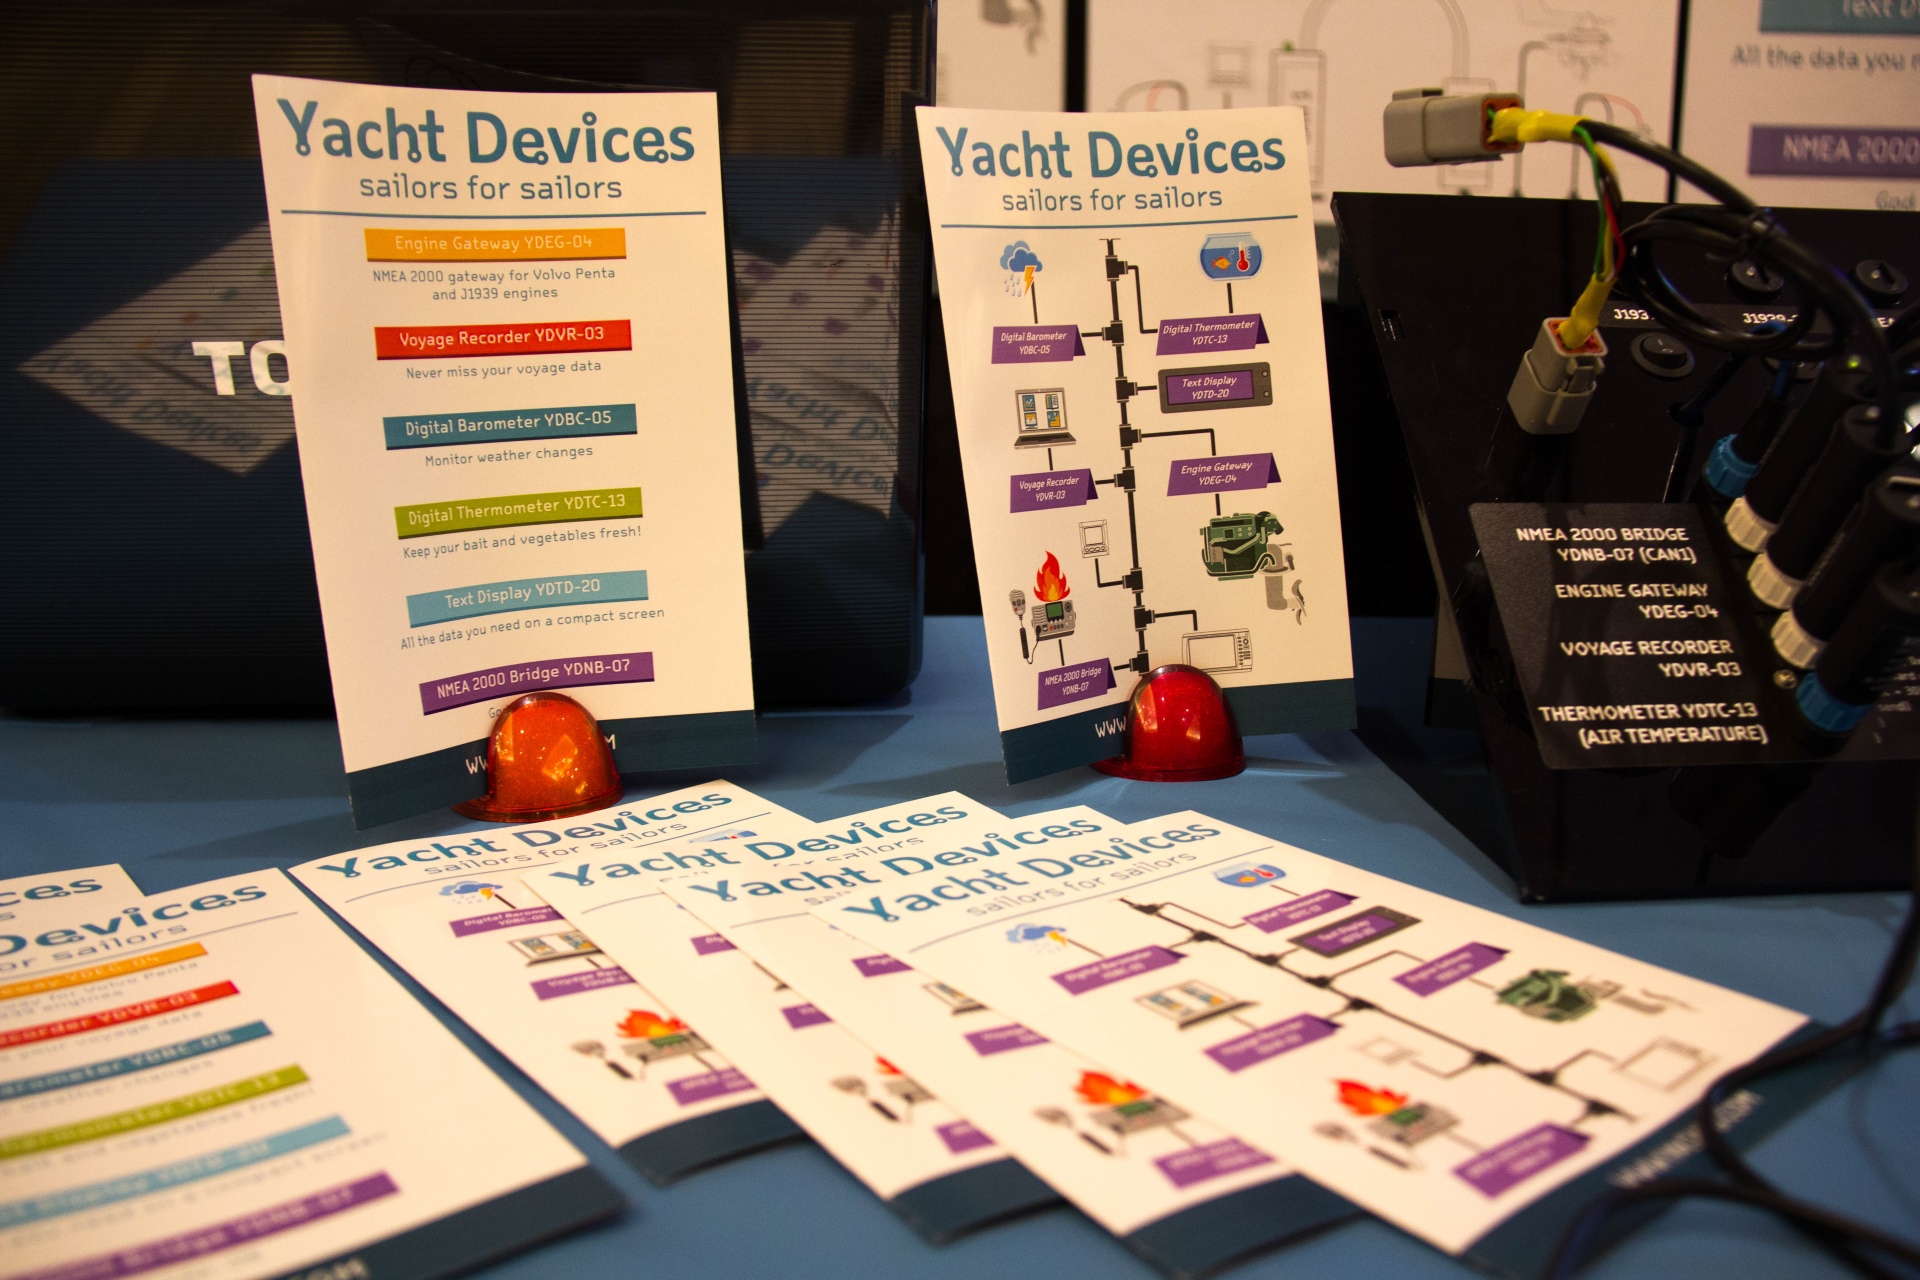 Yacht Devices booth at NMEA 2016 Expo